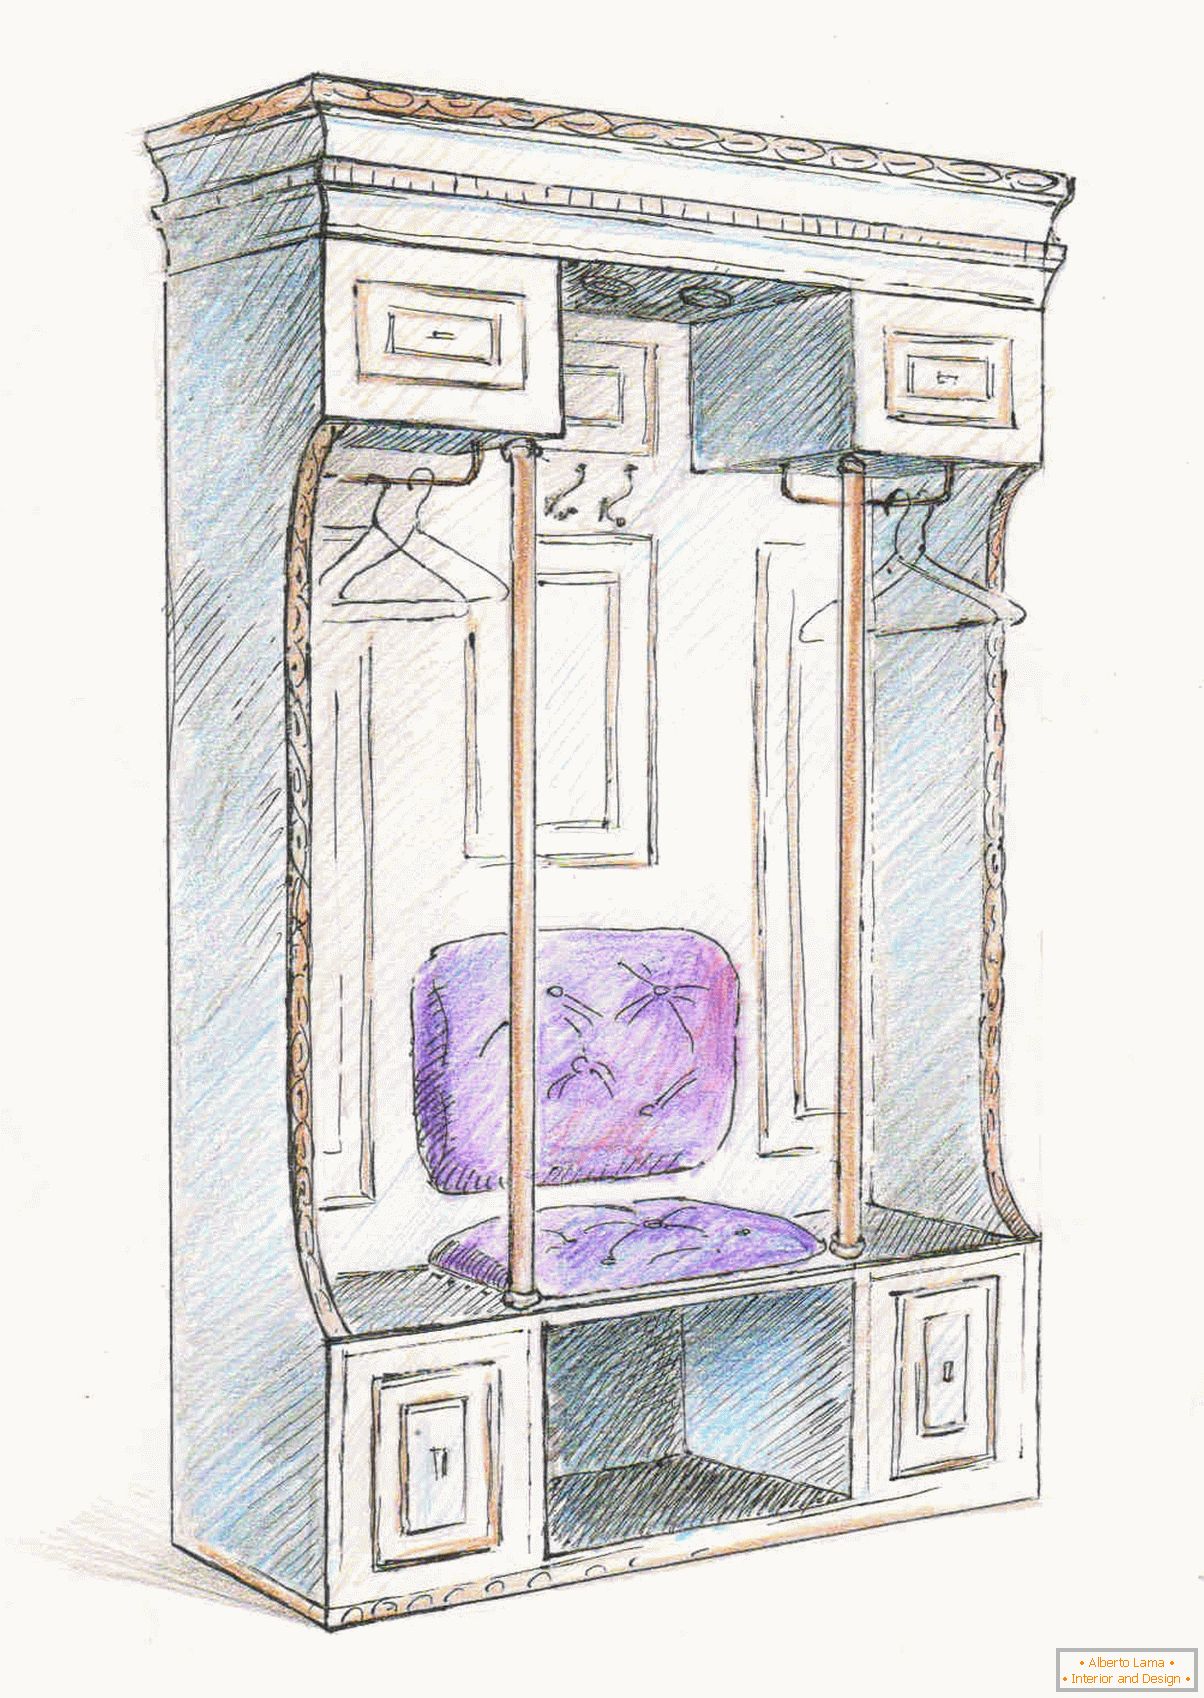 Sketch of the built-in cabinet